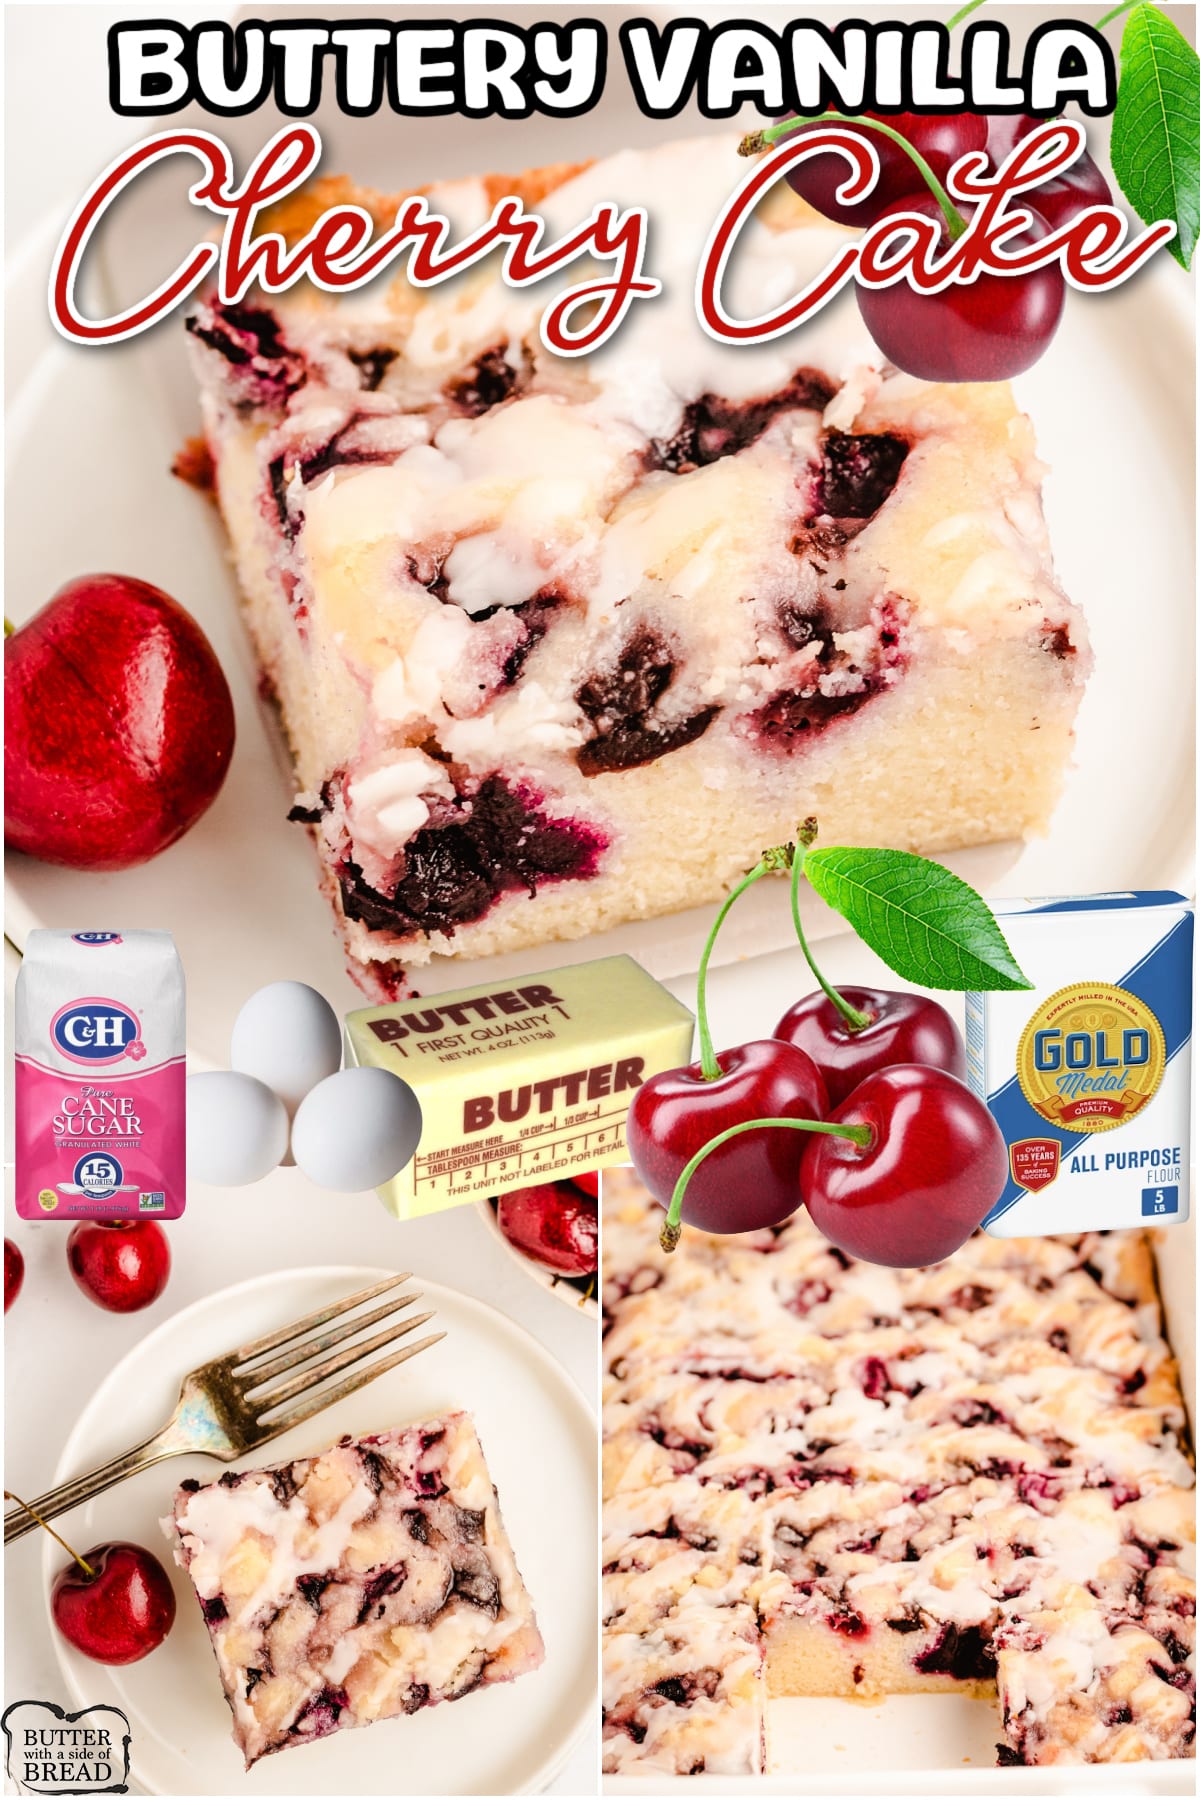 Buttery Cherry Cake is made with simple ingredients & is perfect for cherry lovers! Fantastic cherry almond flavor in this lovely, buttery homemade sheet cake recipe.